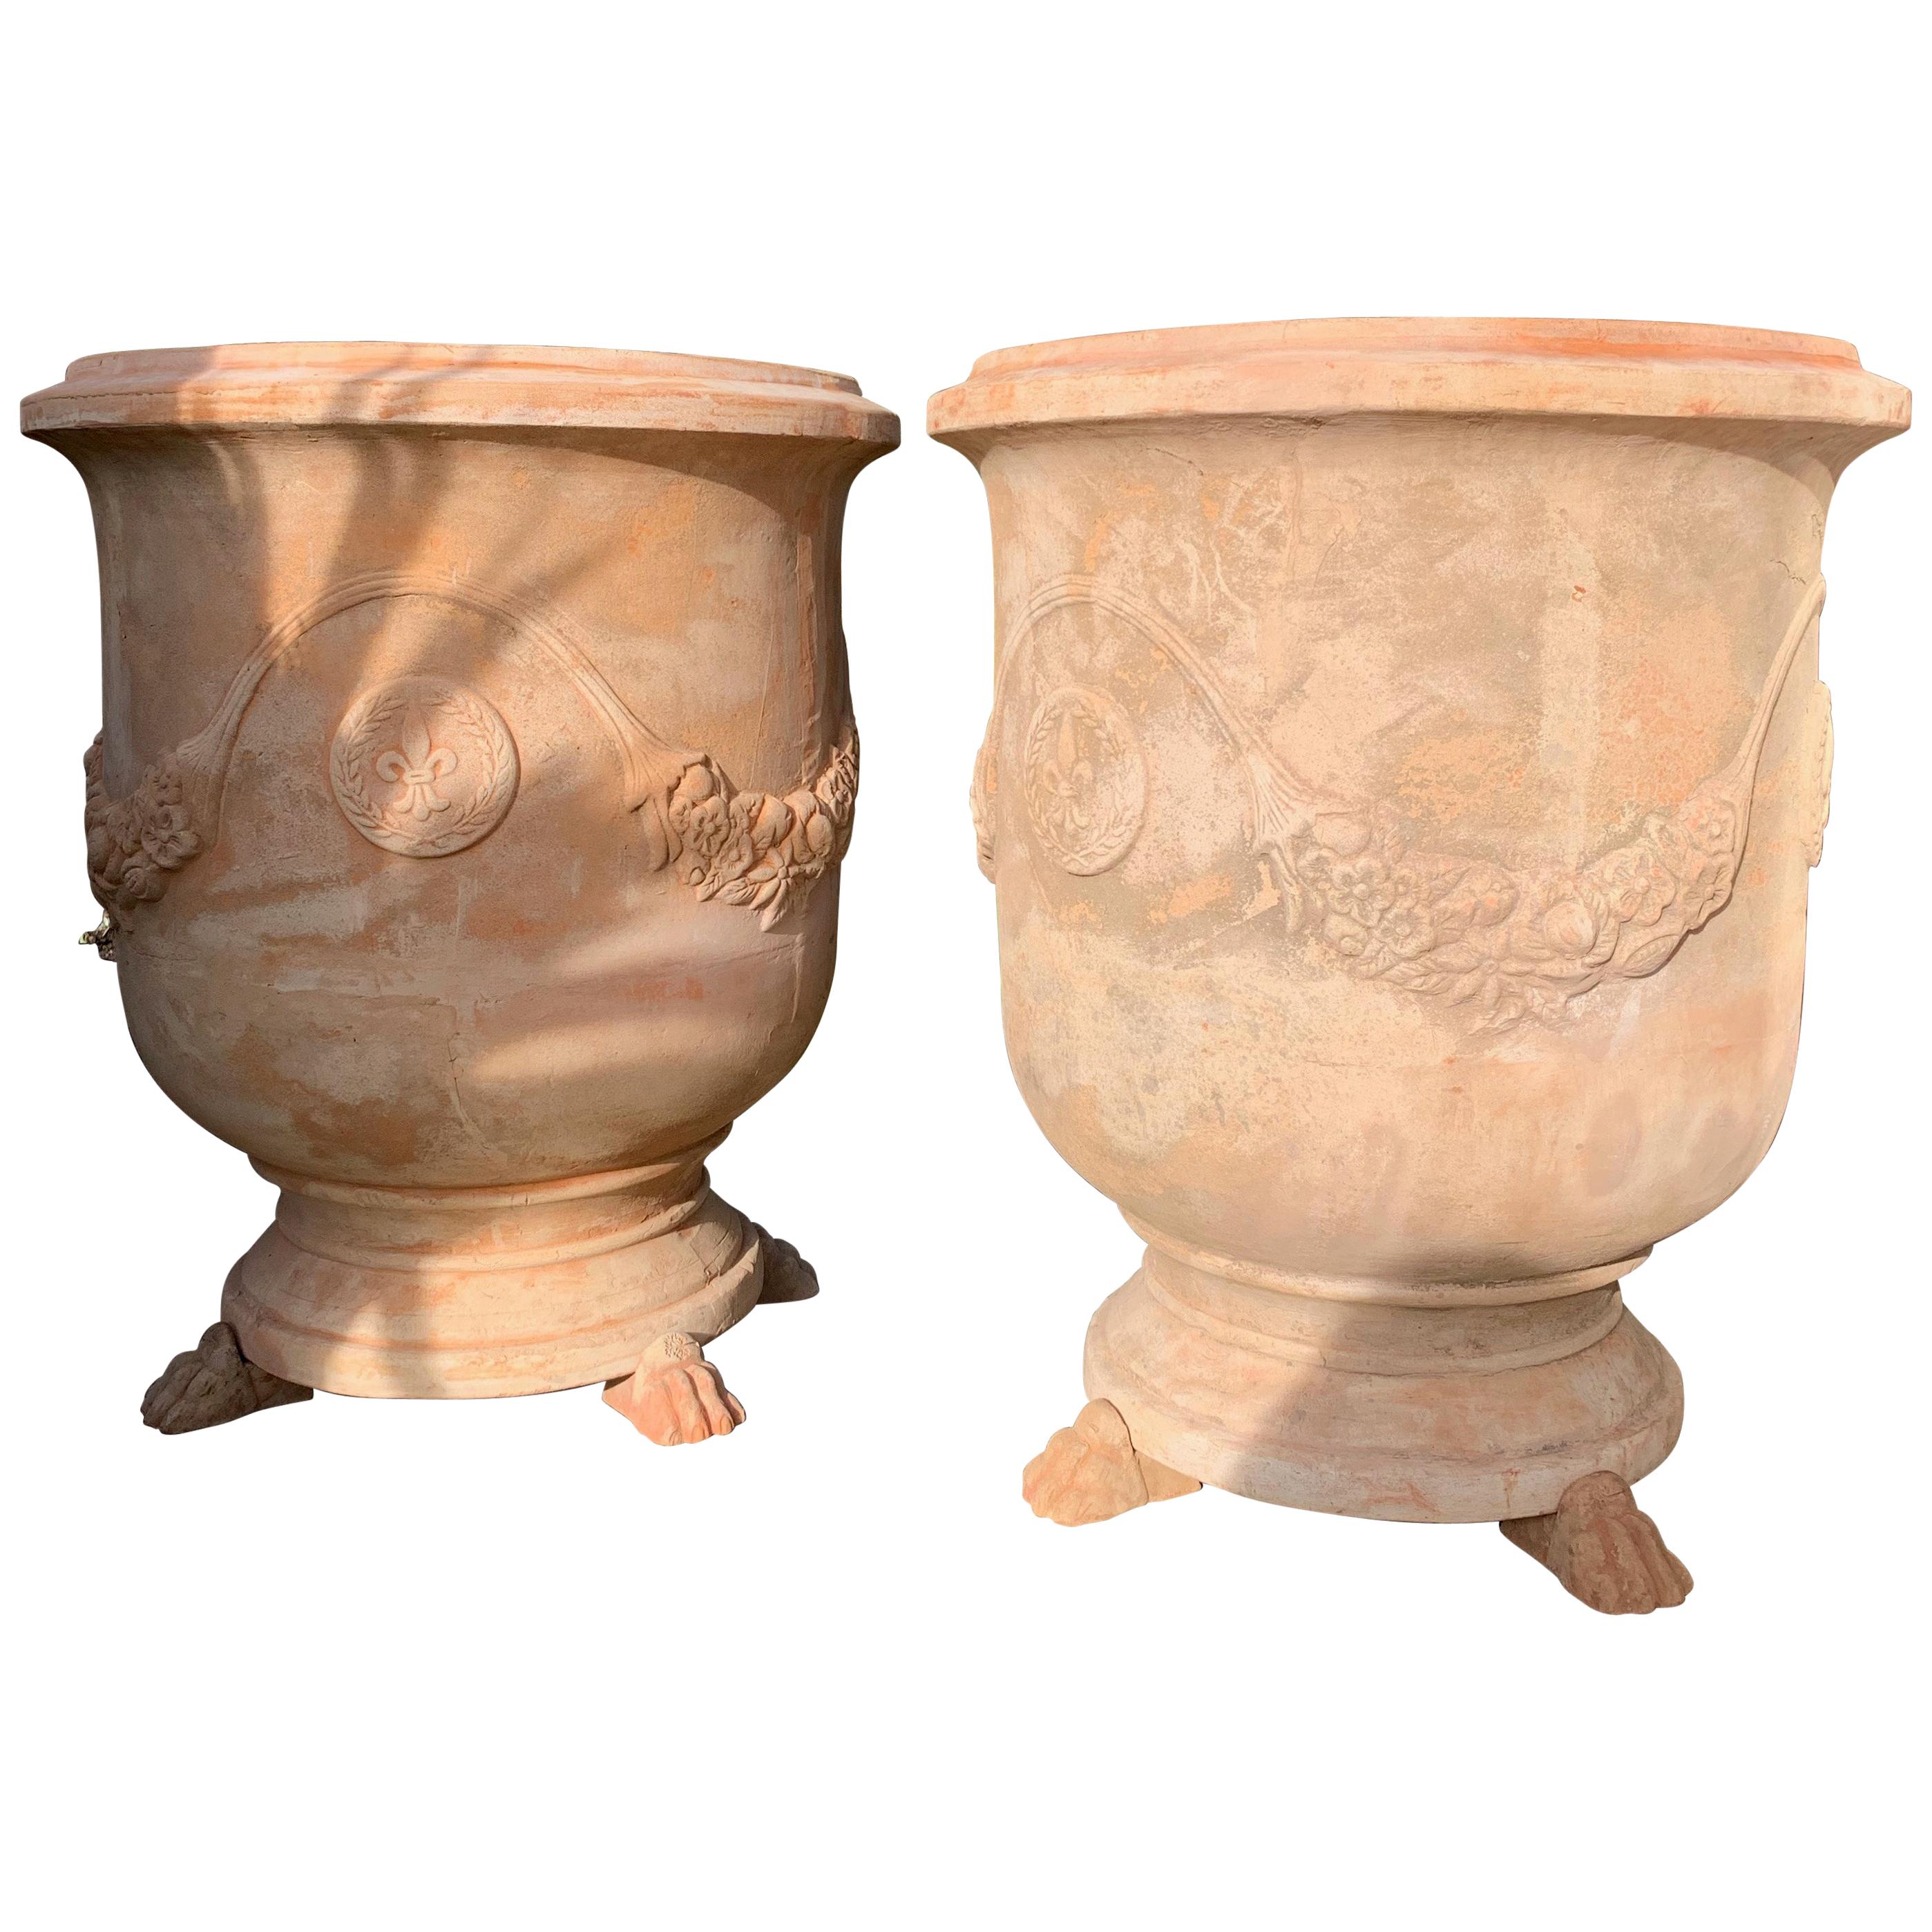 20th Century Large Handmade Terracotta Pots from Tuscany For Sale